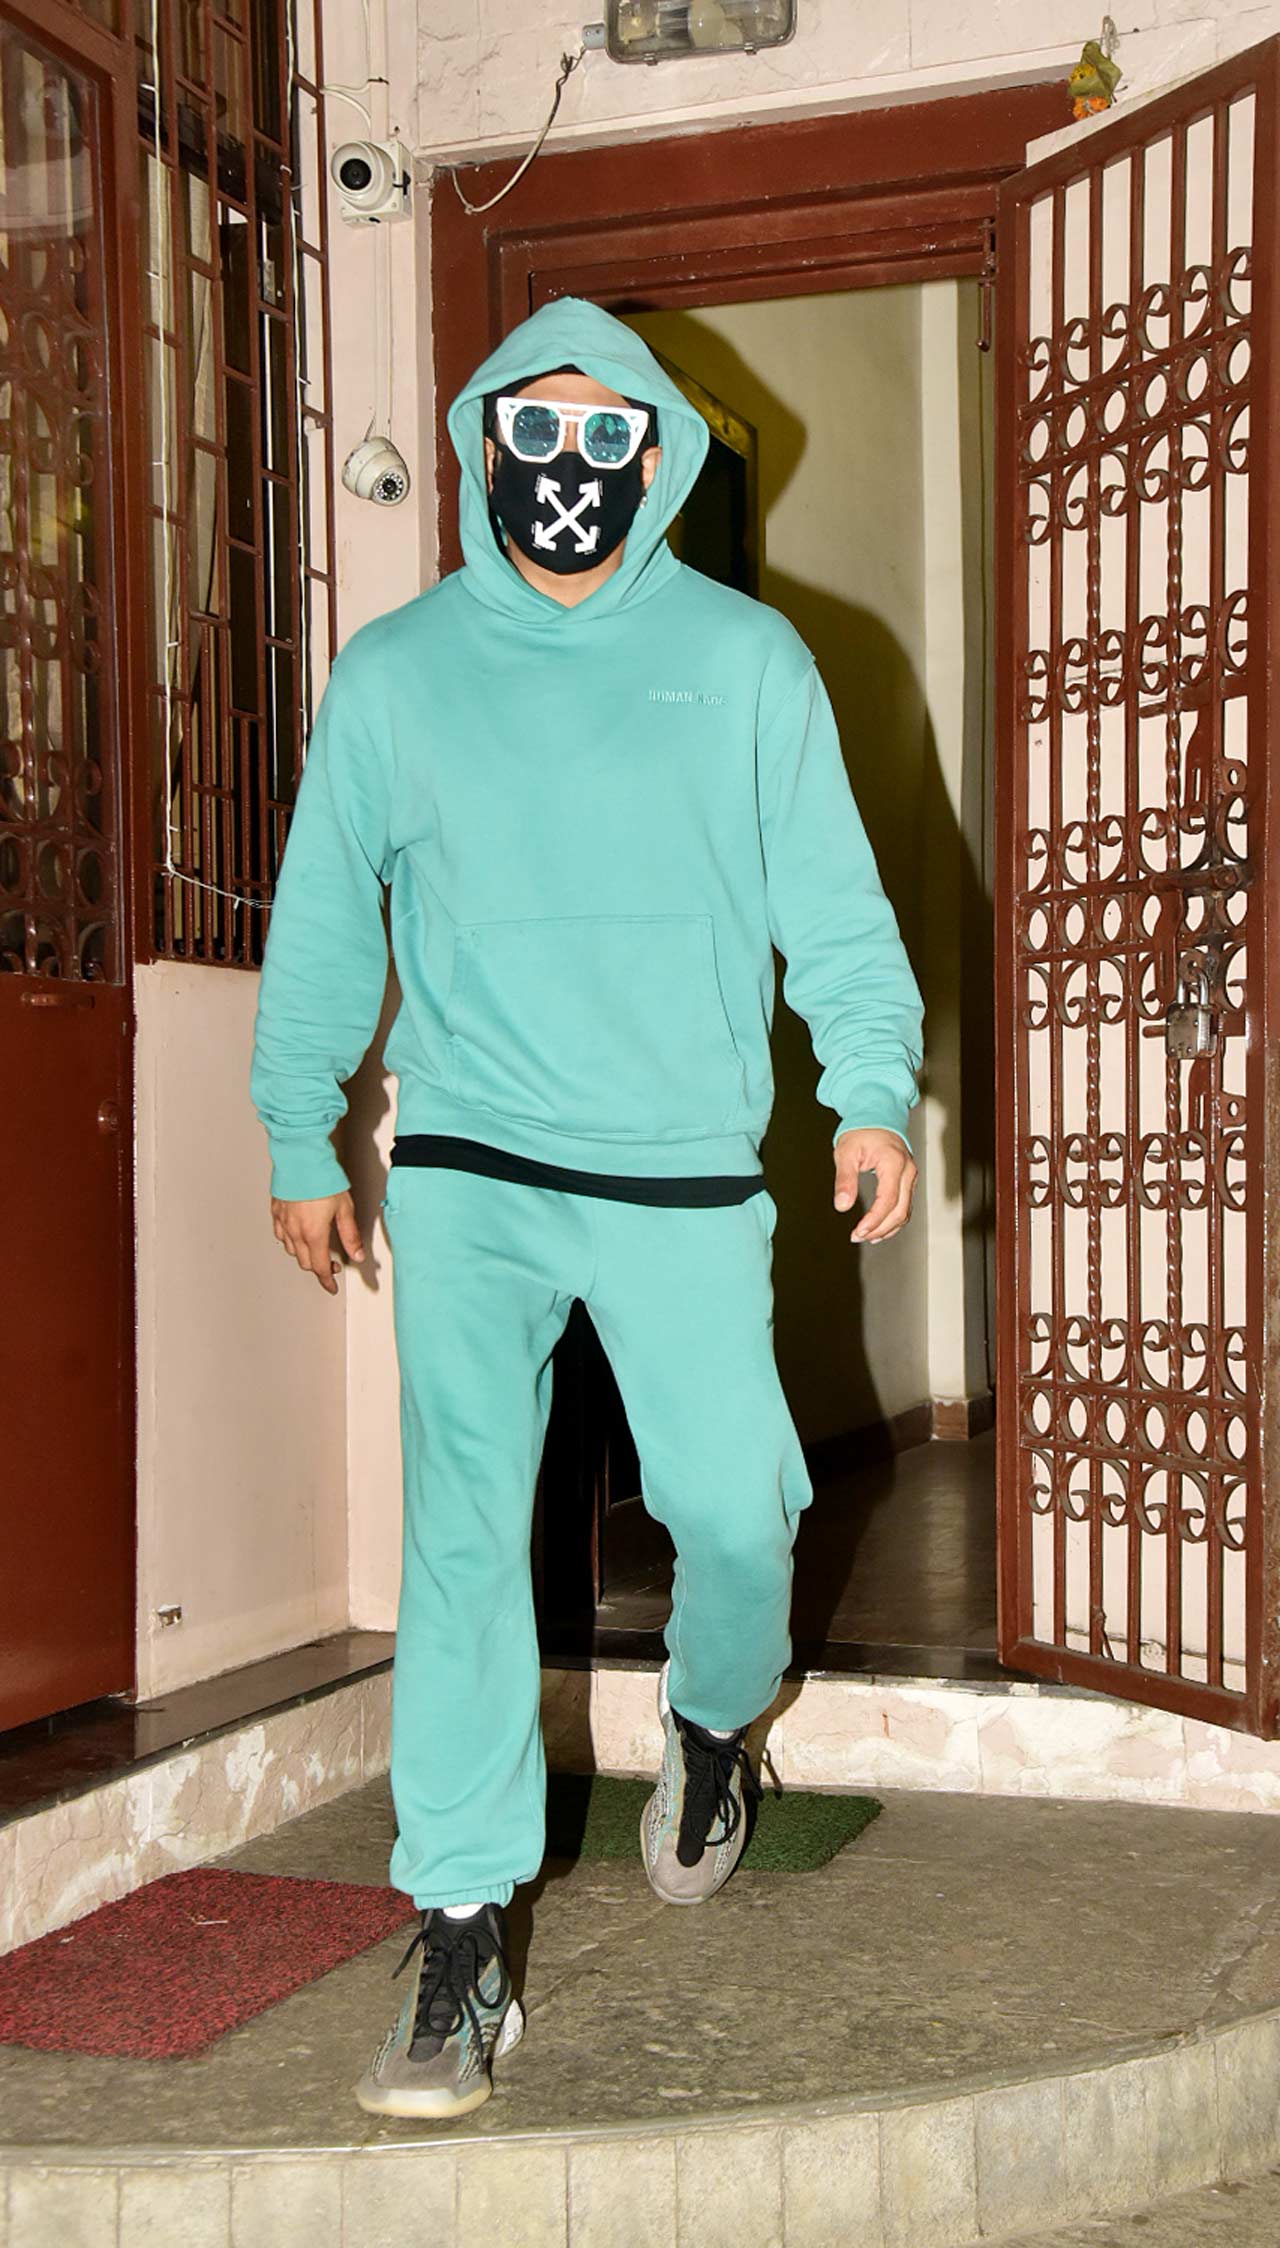 Ranveer Singh was also spotted at a dubbing studio in Mumbai. The actor, who was last seen in Simmba, opted for a teal blue coloured track suit during the outing.